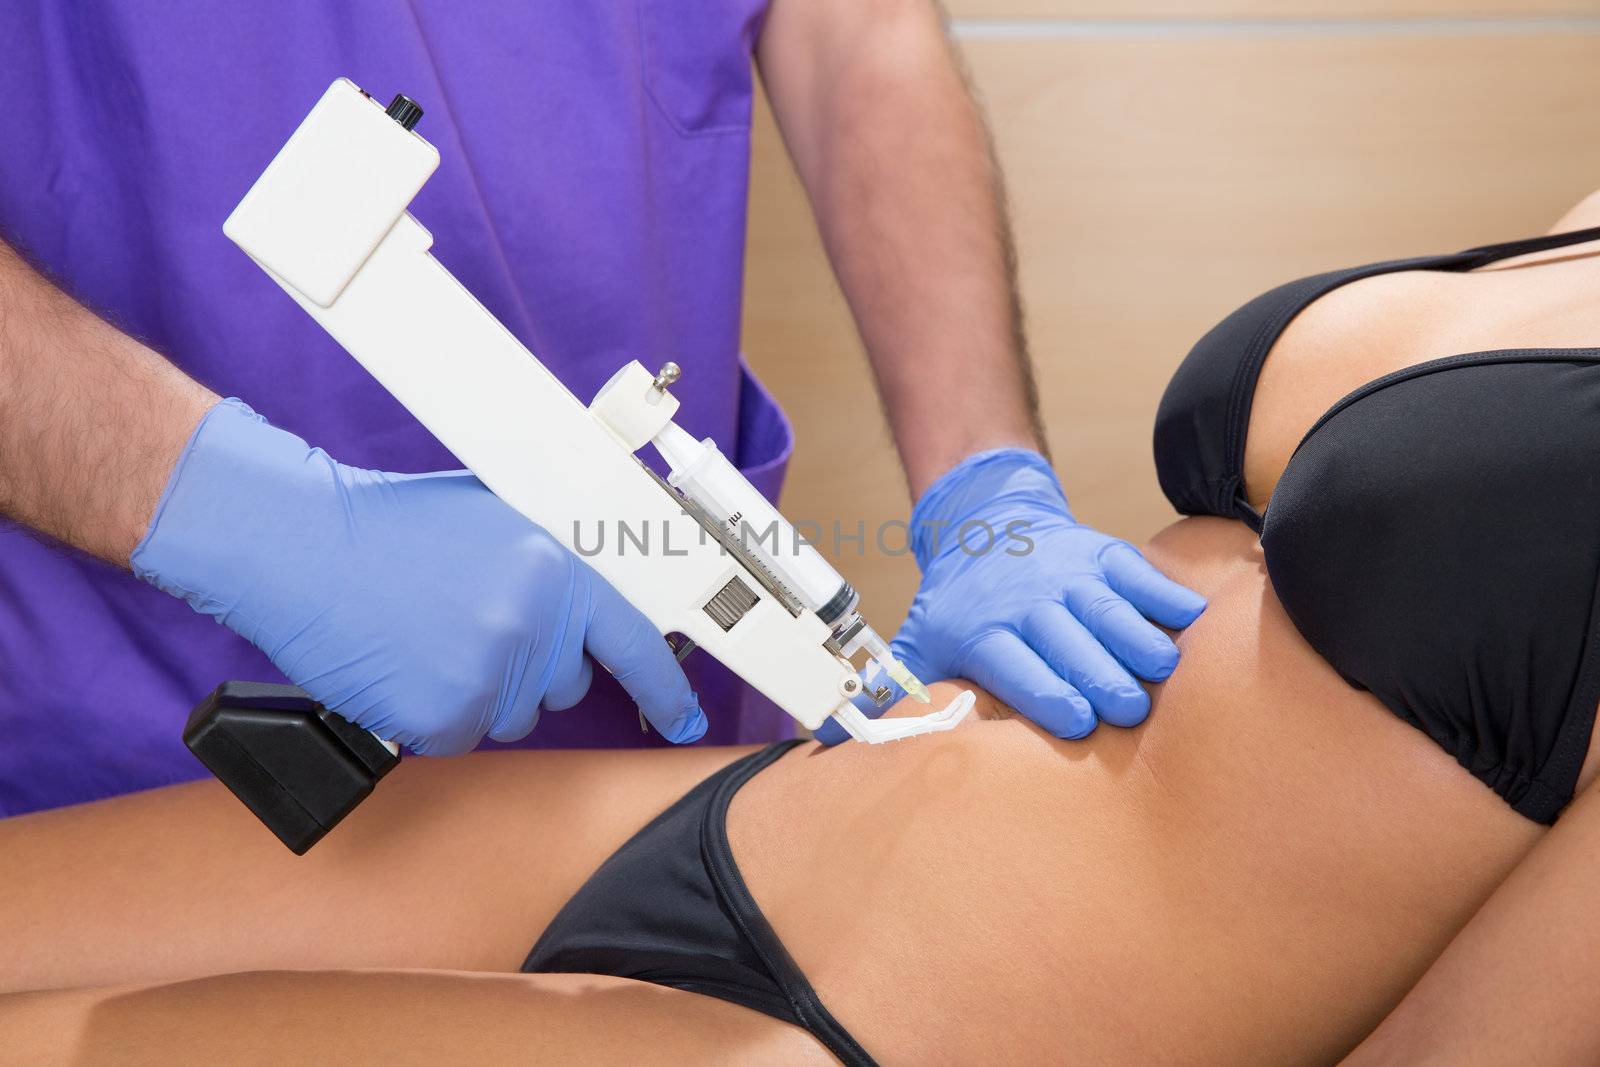 abdominal mesotherapy gun therapy doctor to woman by lunamarina